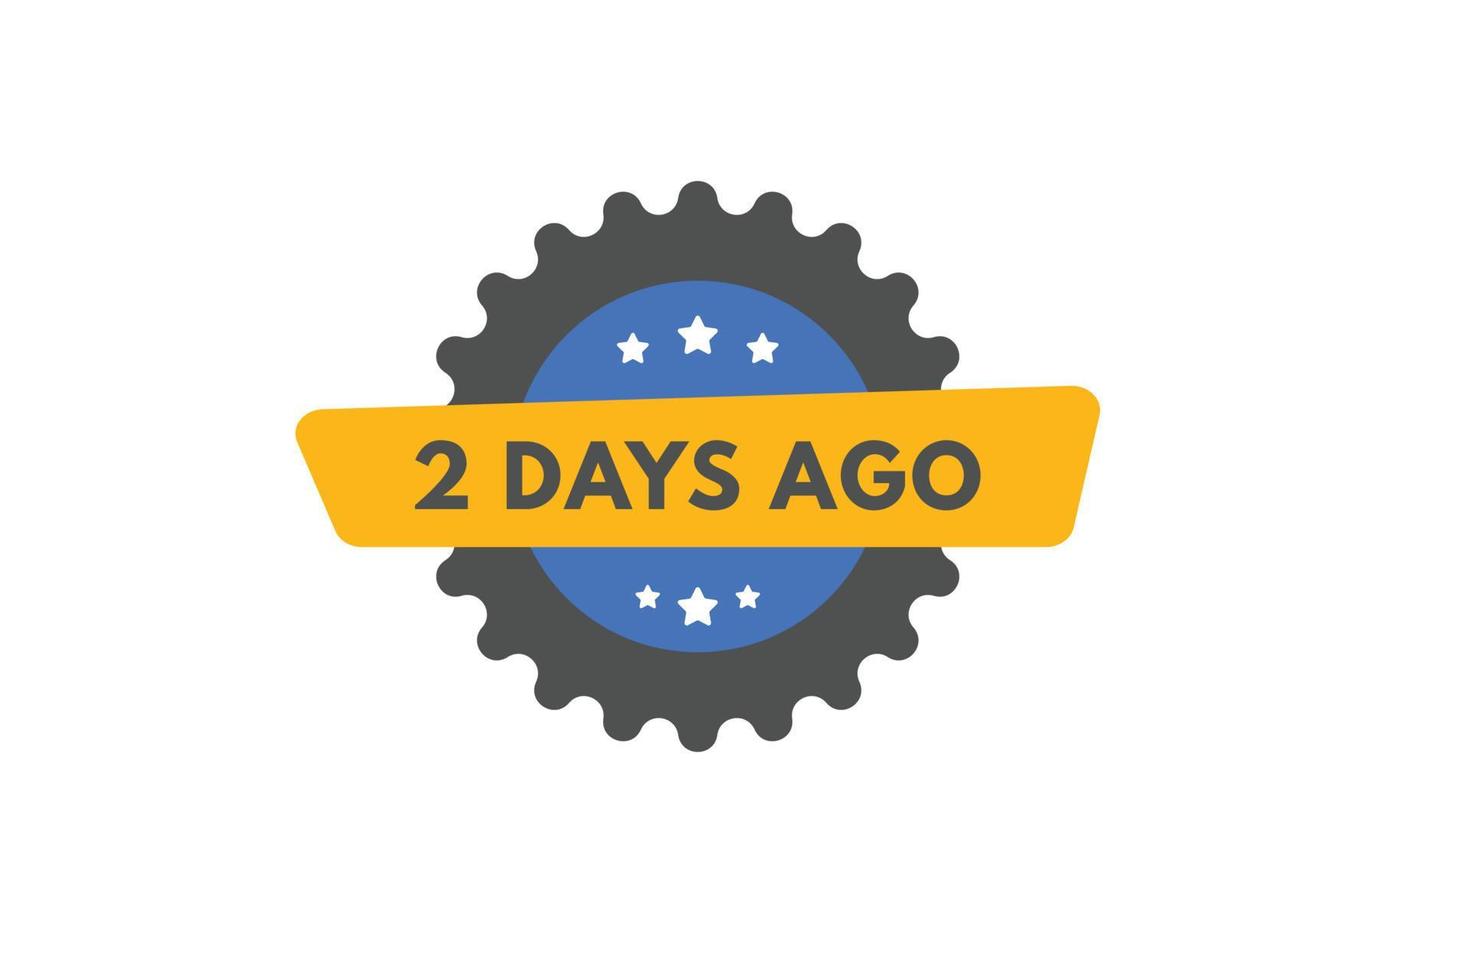 2 days ago text web button. two day ago banner label vector